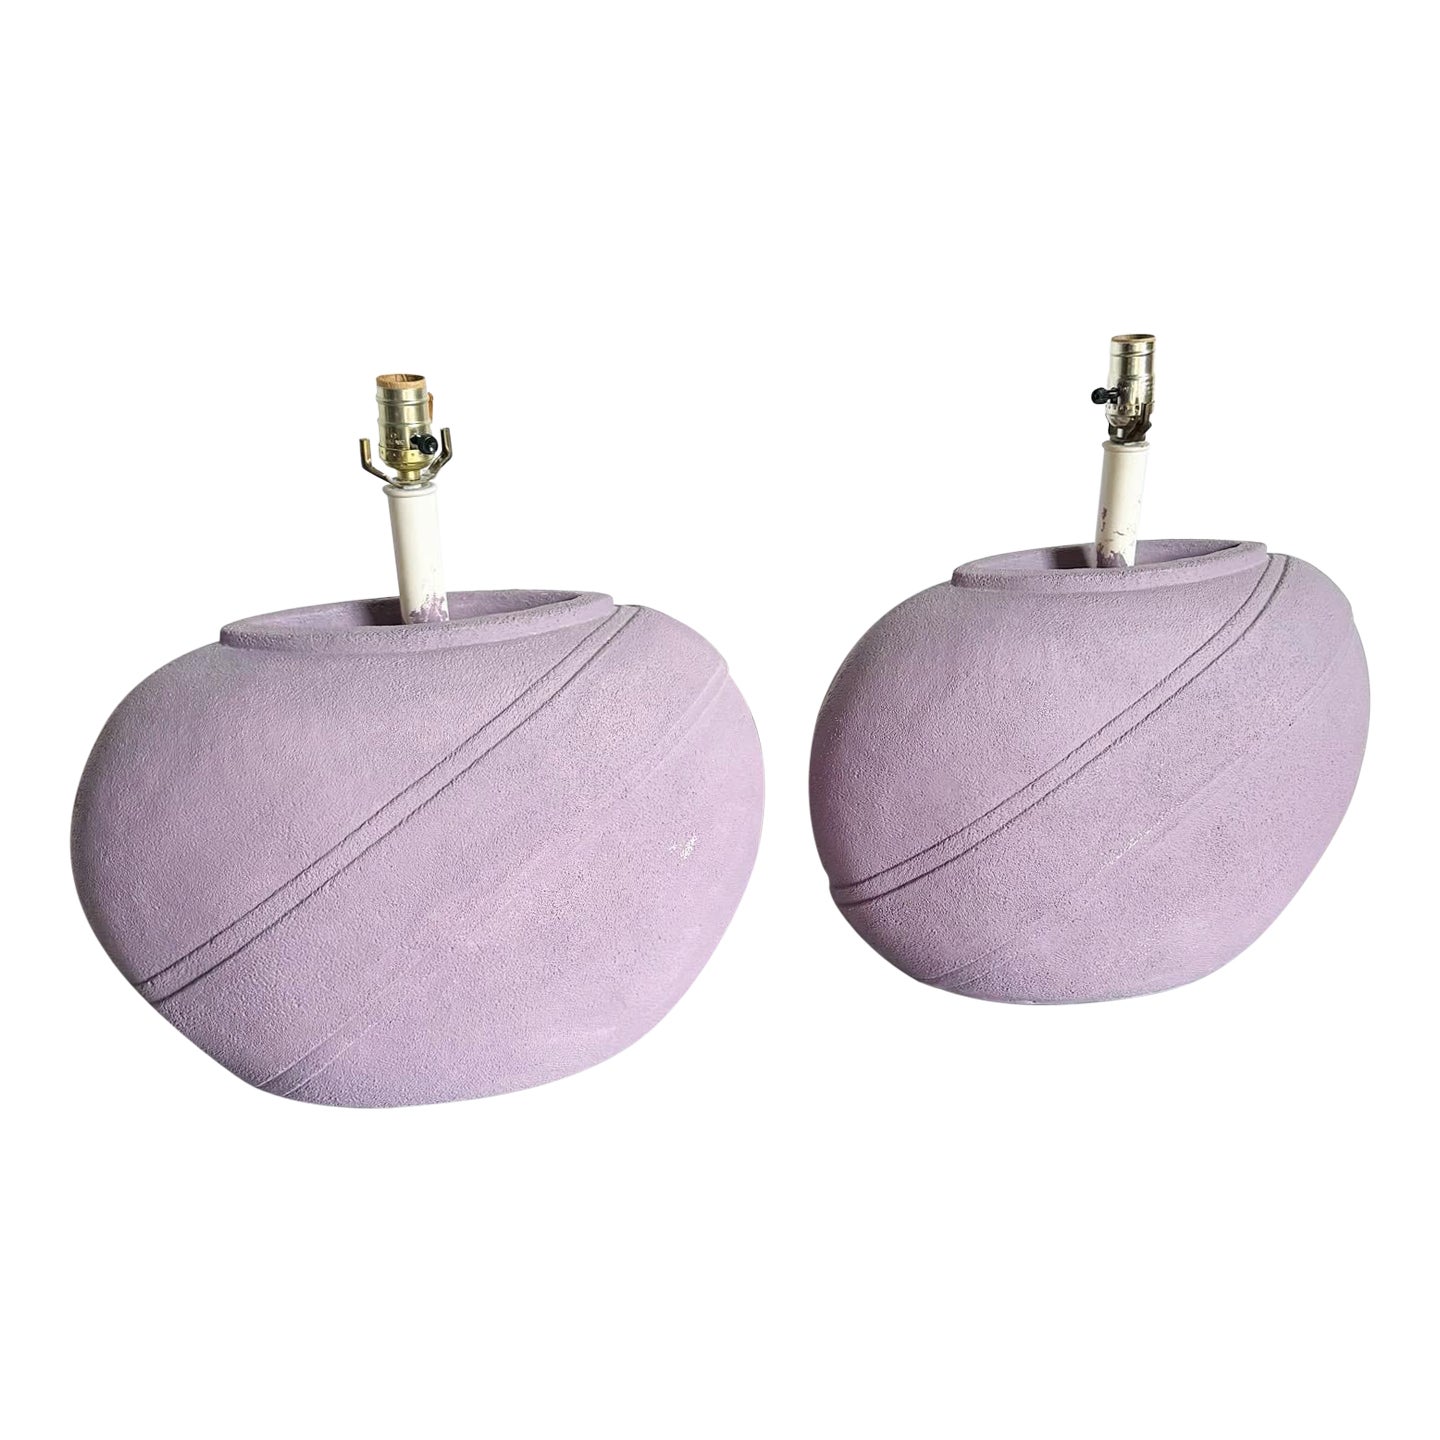 Postmodern Lavender Purple Vase Table Lamps - a Pair For Sale